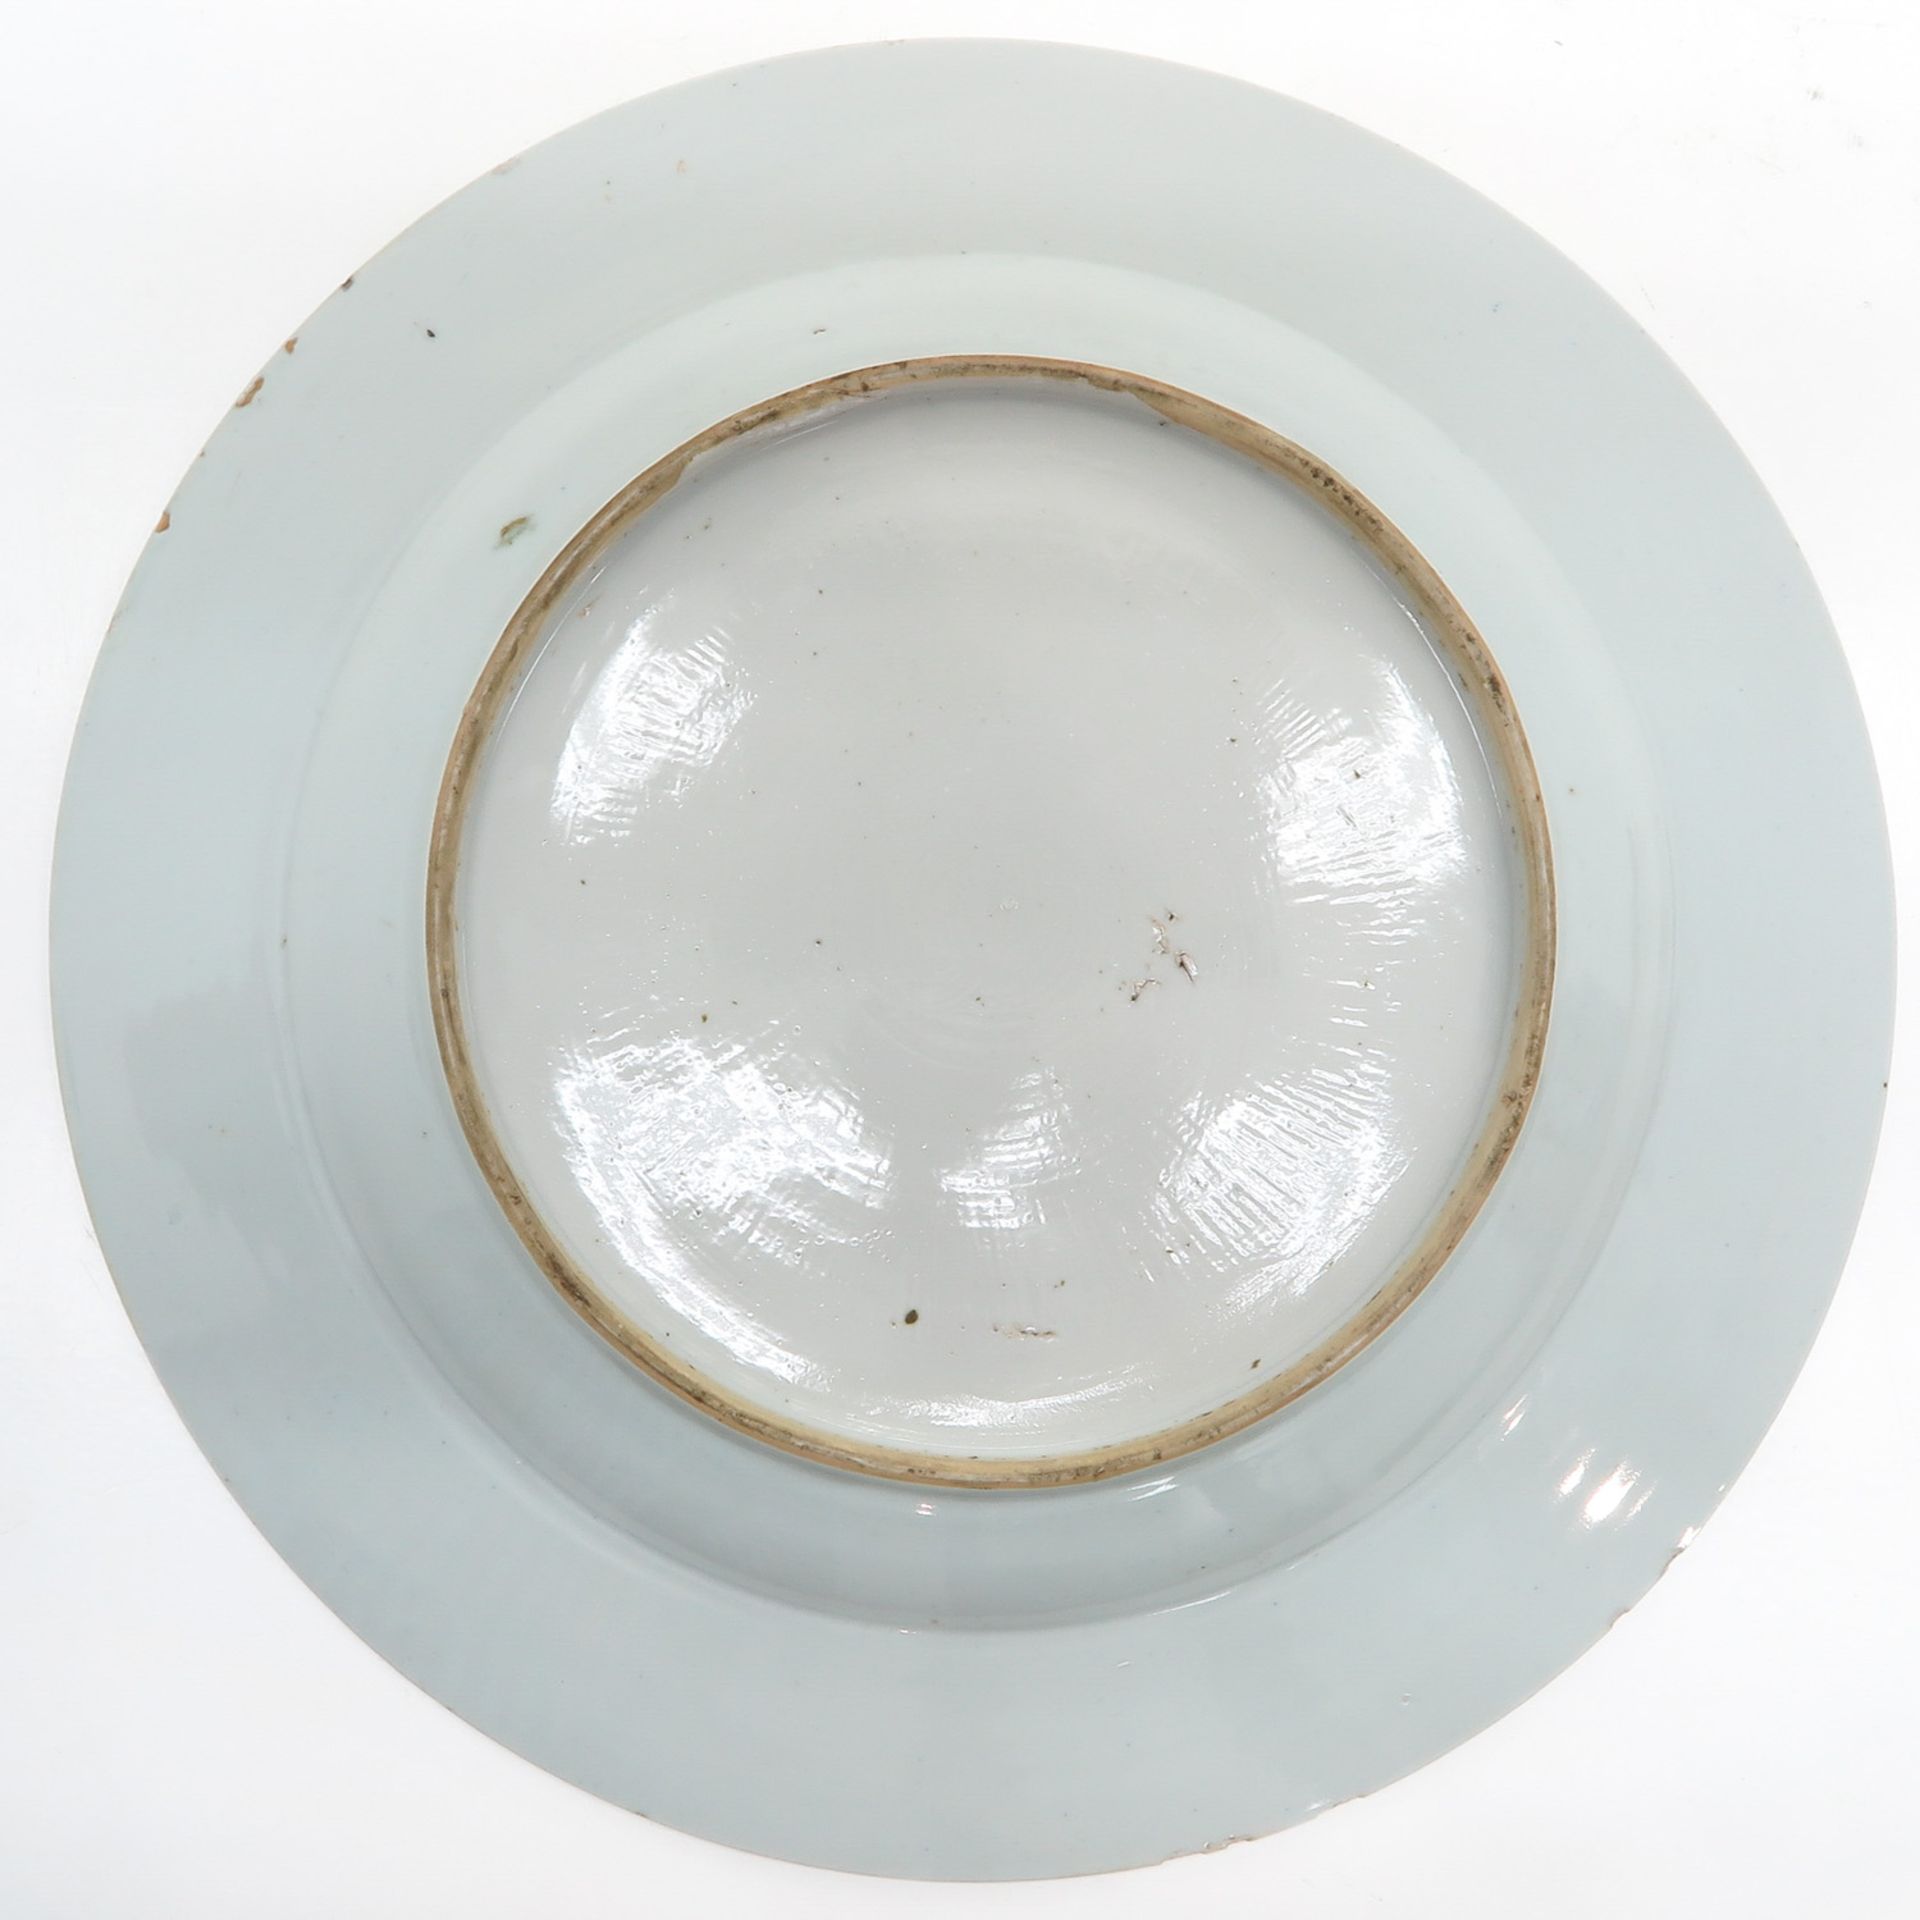 China Porcelain Famille Rose Plate Circa 1800 - Image 2 of 2